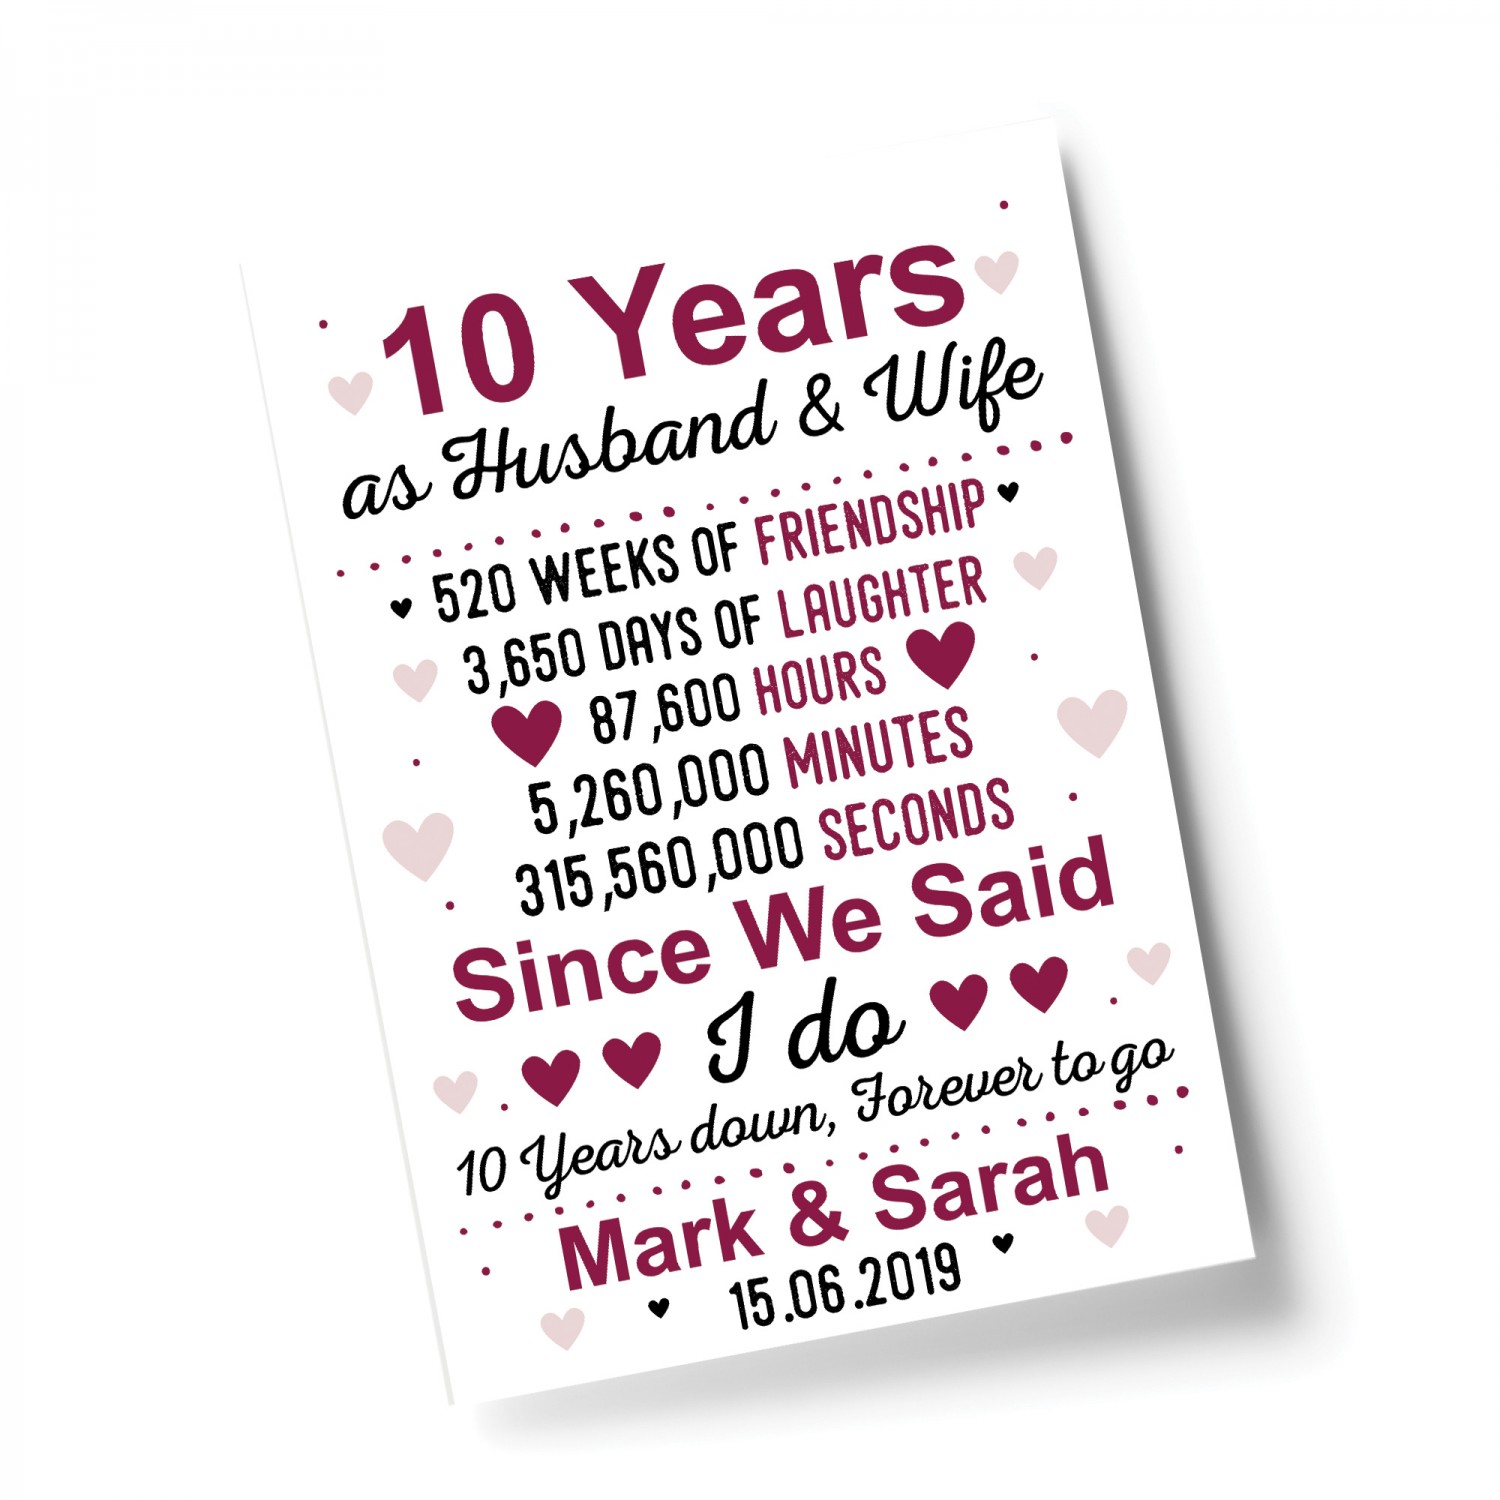 10th anniversary message for husband